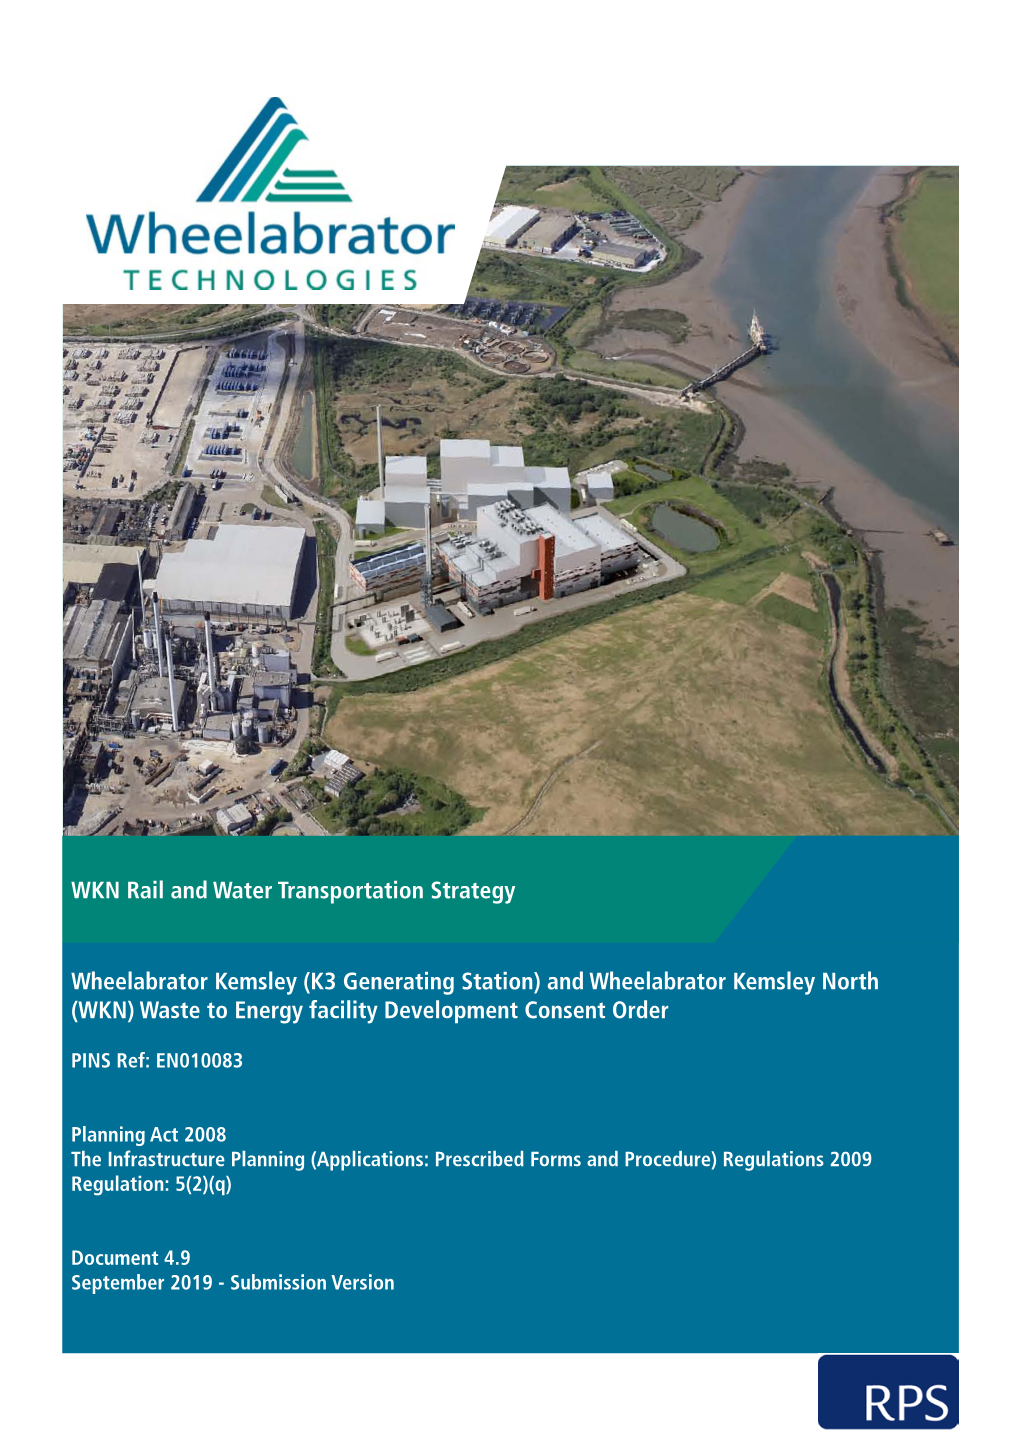 And Wheelabrator Kemsley North Echnologies Inc Lient Wheelabrator T (WKN) Waste to Energy Facility Development Consent Order C